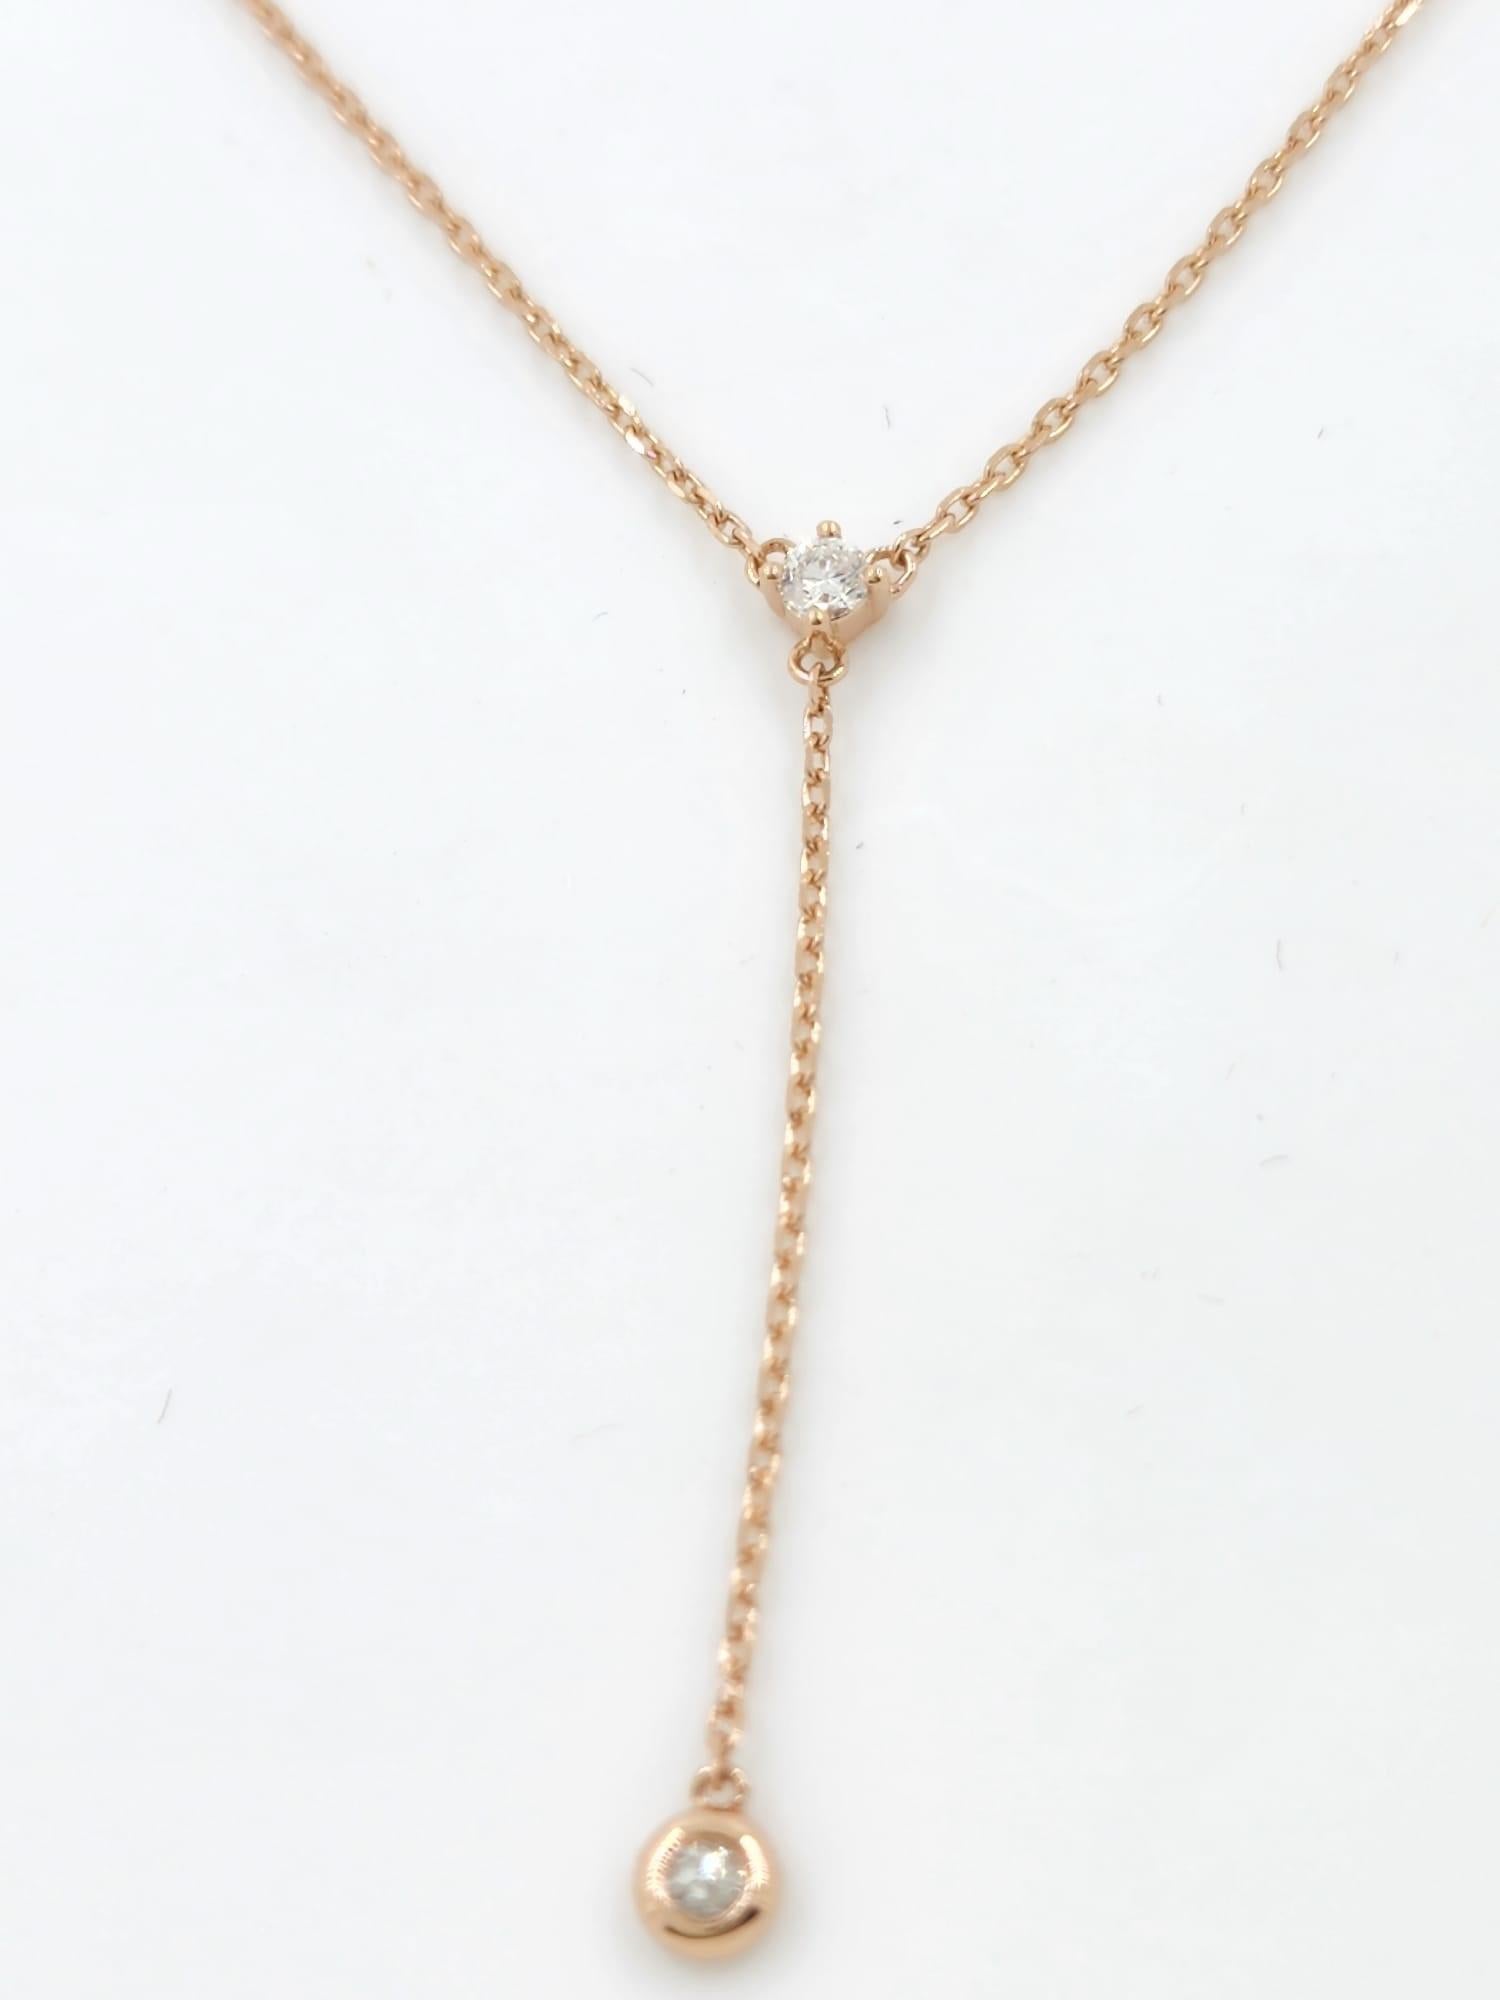 Brilliant Cut 8-Station Diamond by the Yard Necklace in 14 Karat Rose Gold